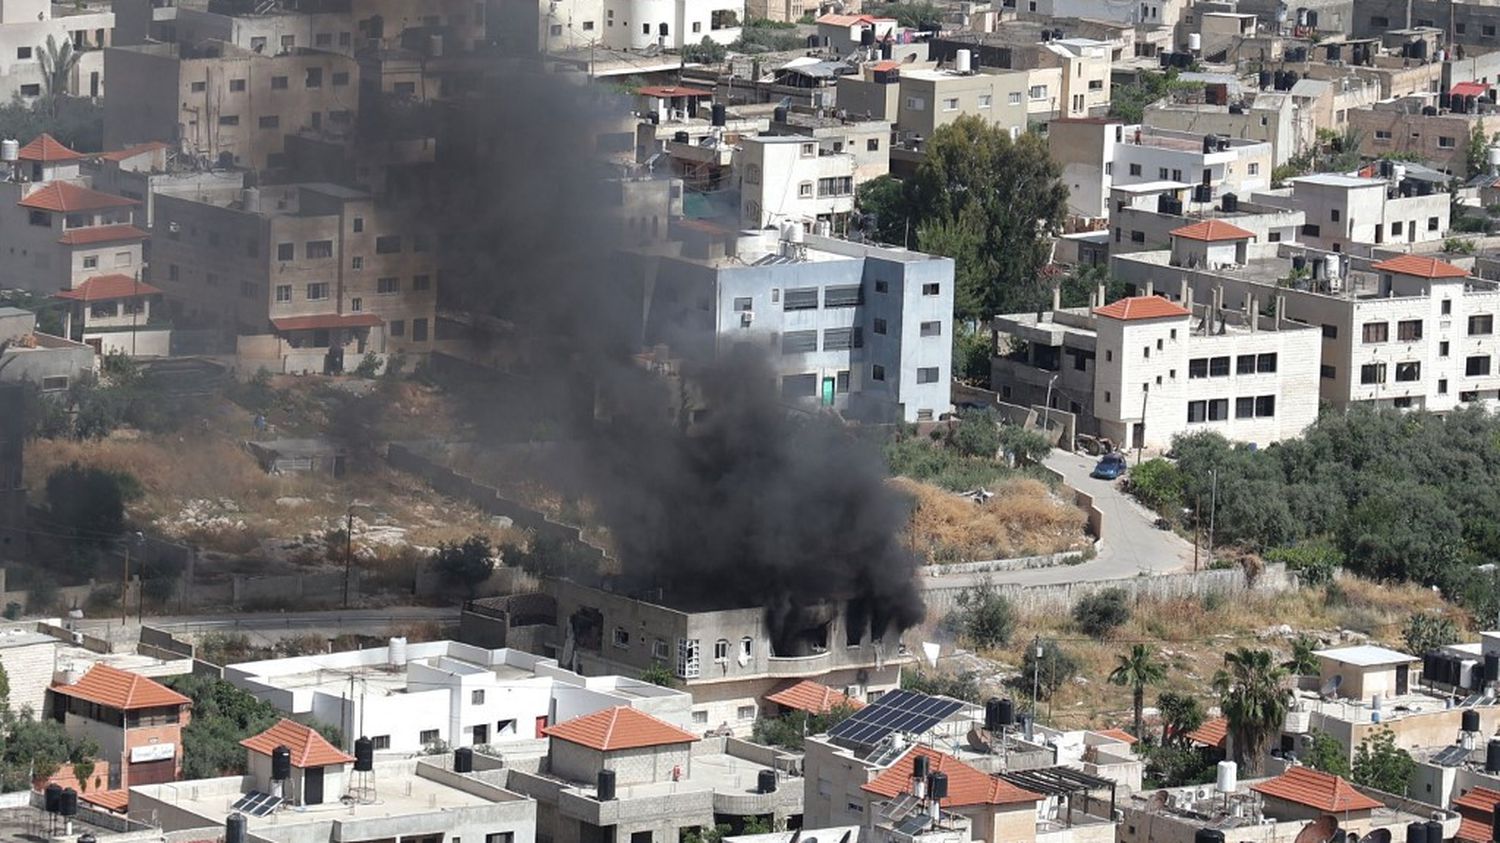 West Bank: one injured in clashes between Palestinians and the Israeli army in Jenin
